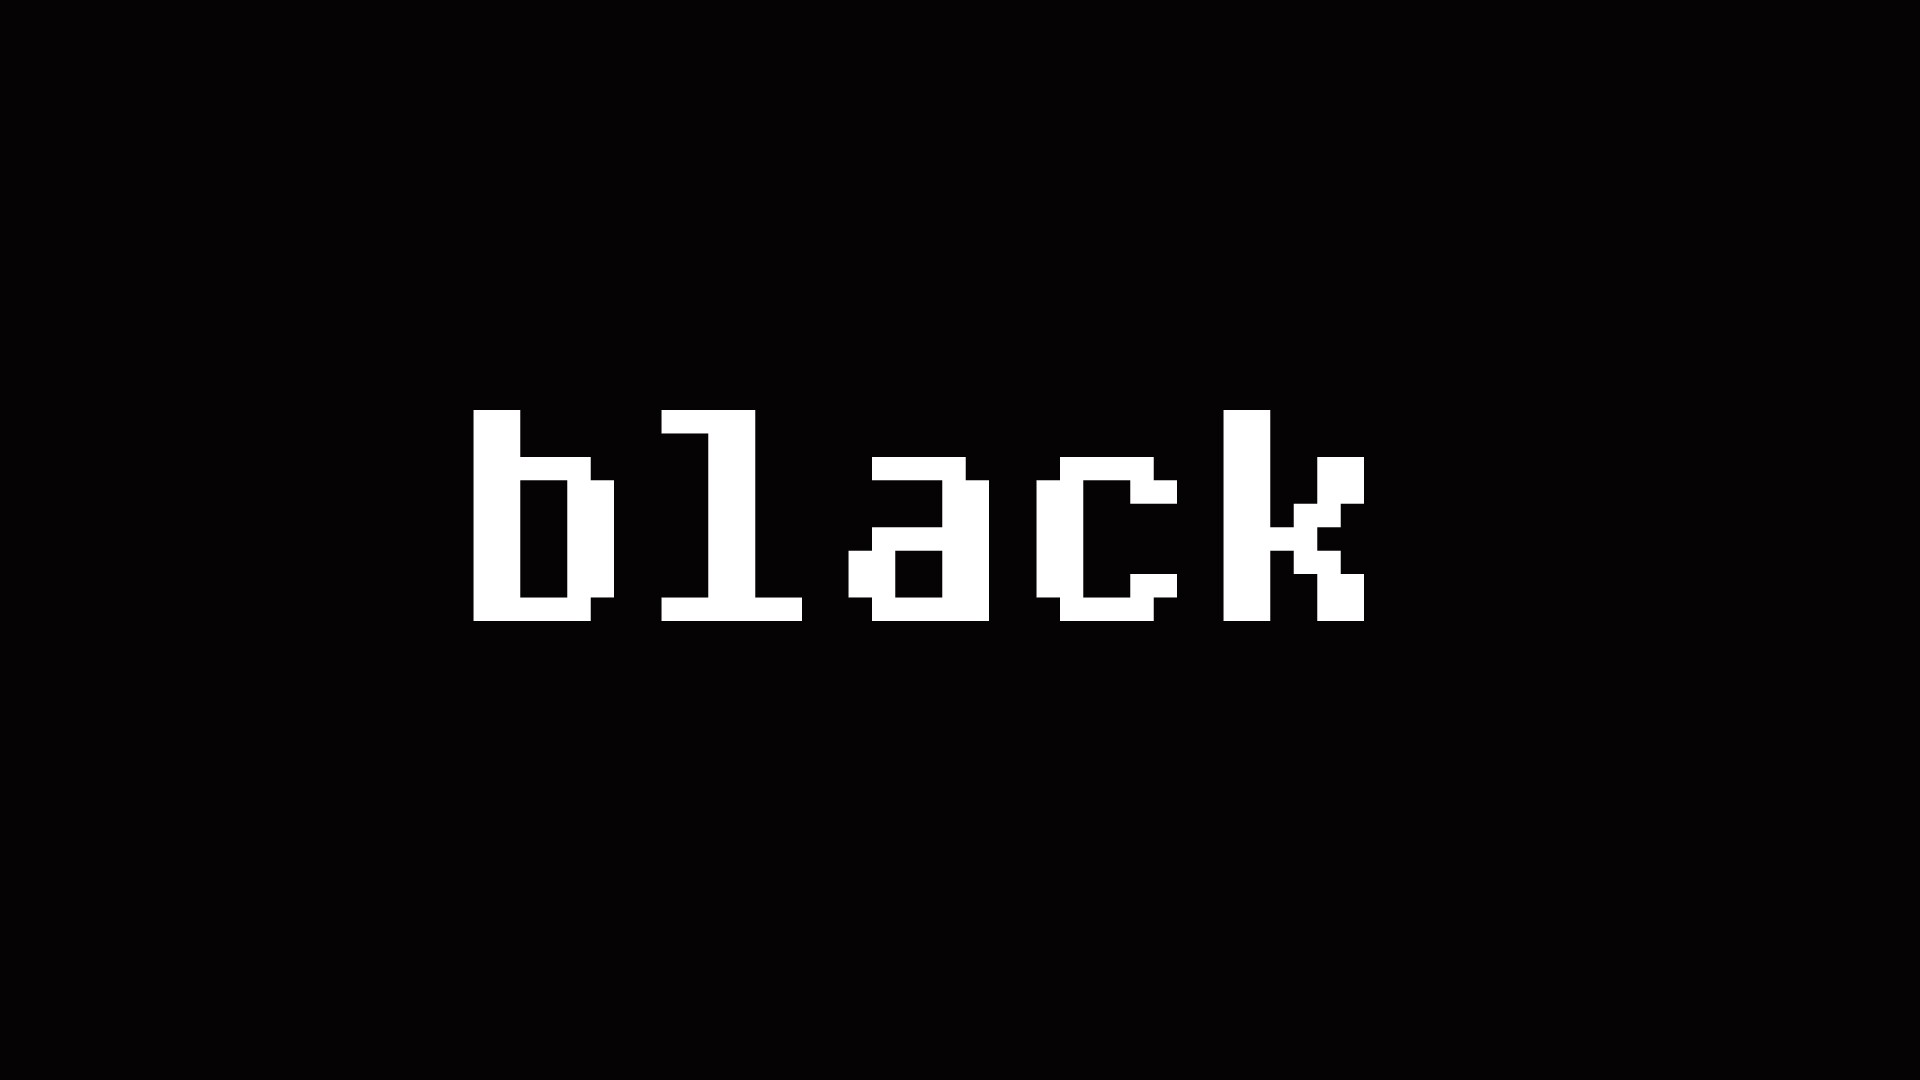 black, white, text, simple, clean - HD Wallpaper View, Resize and Free Down...